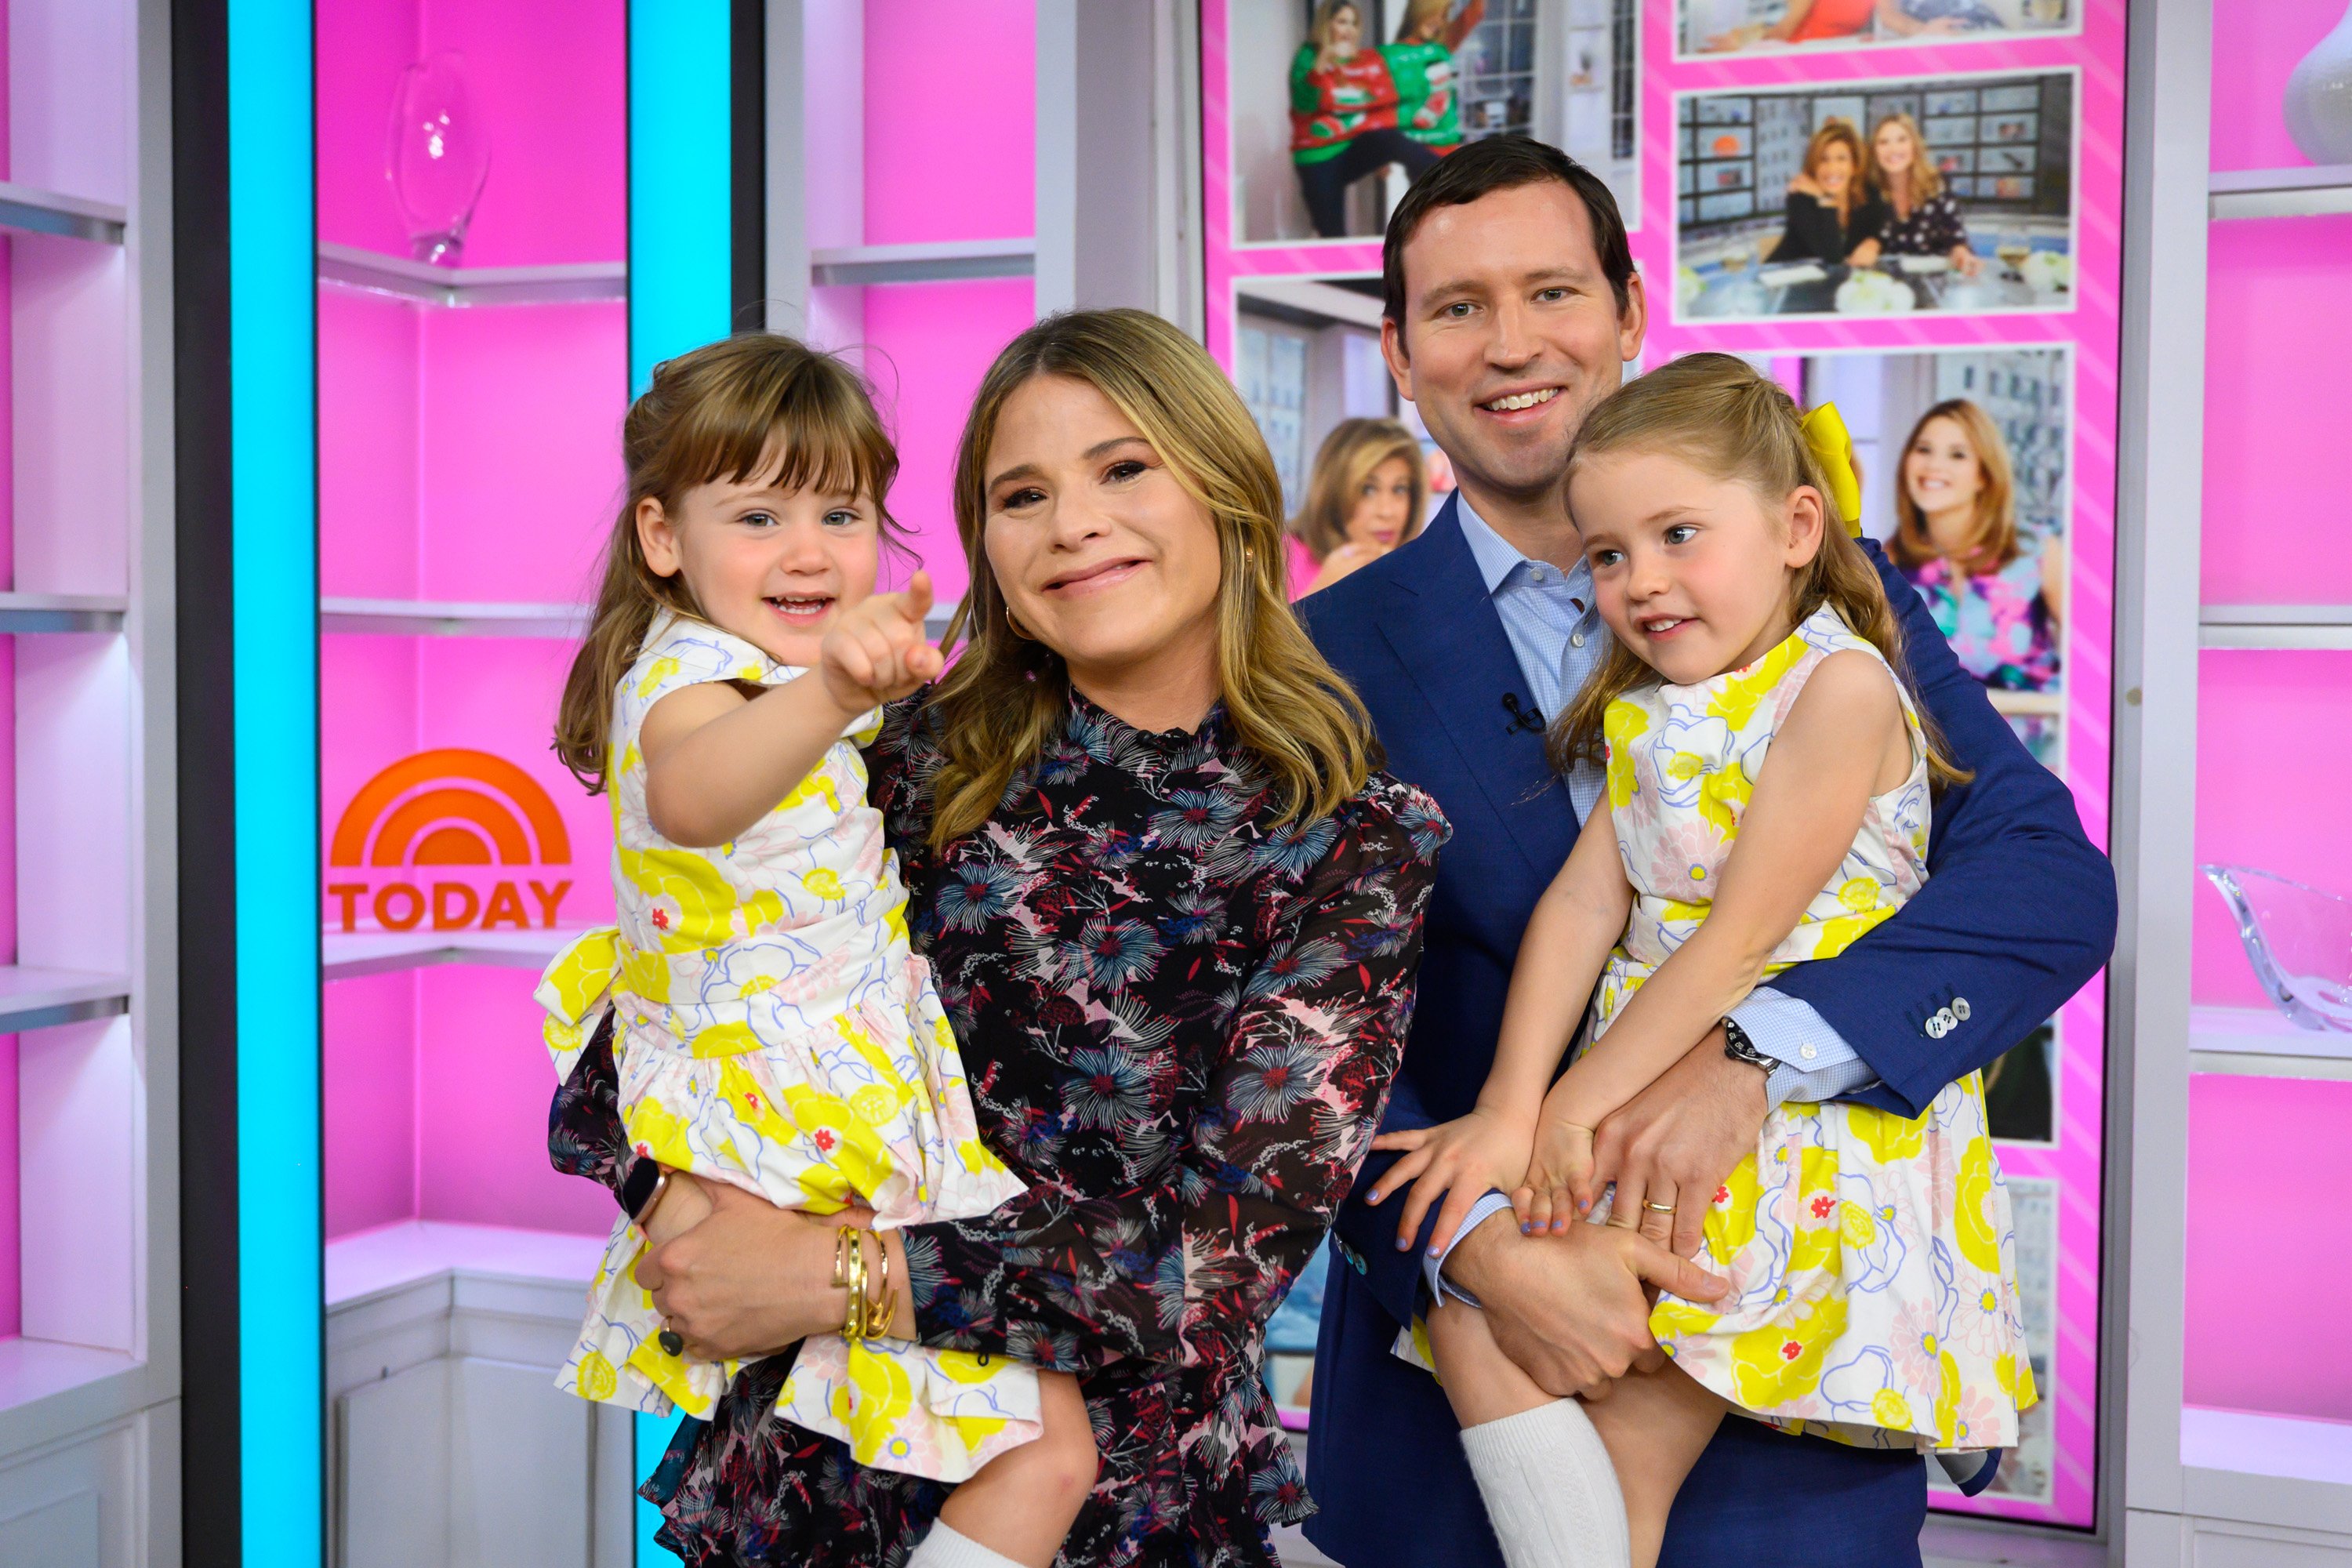 Jenna Bush Hager and her husband, Henry, are raising their three kids ...